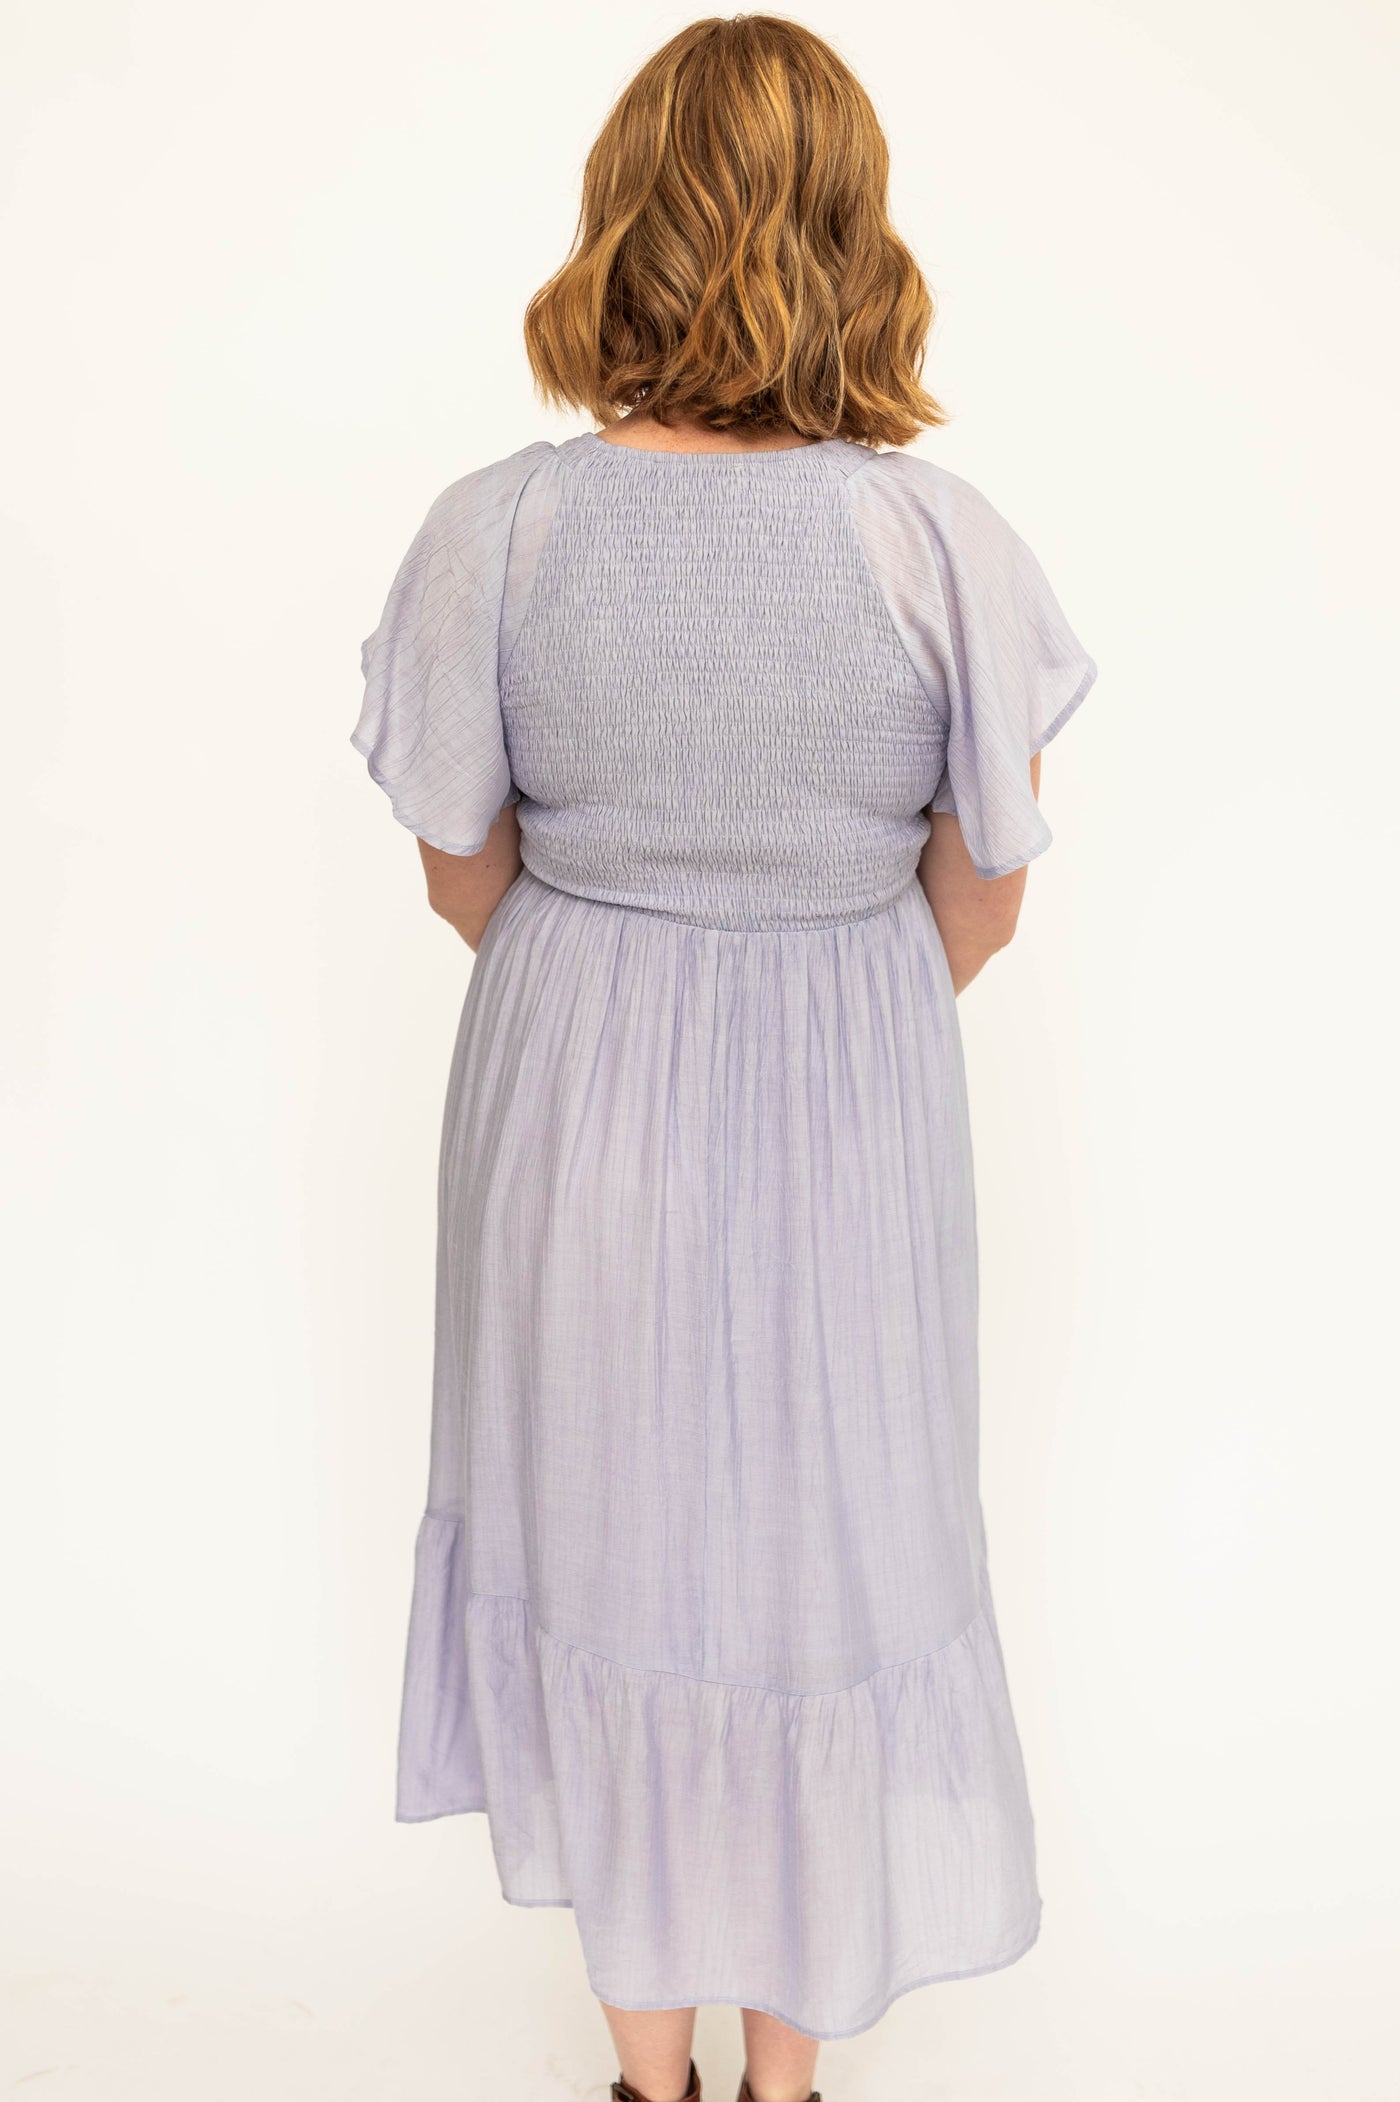 Back view of a Short sleeve lavender satin dress with a V-neck and smocked bodice.